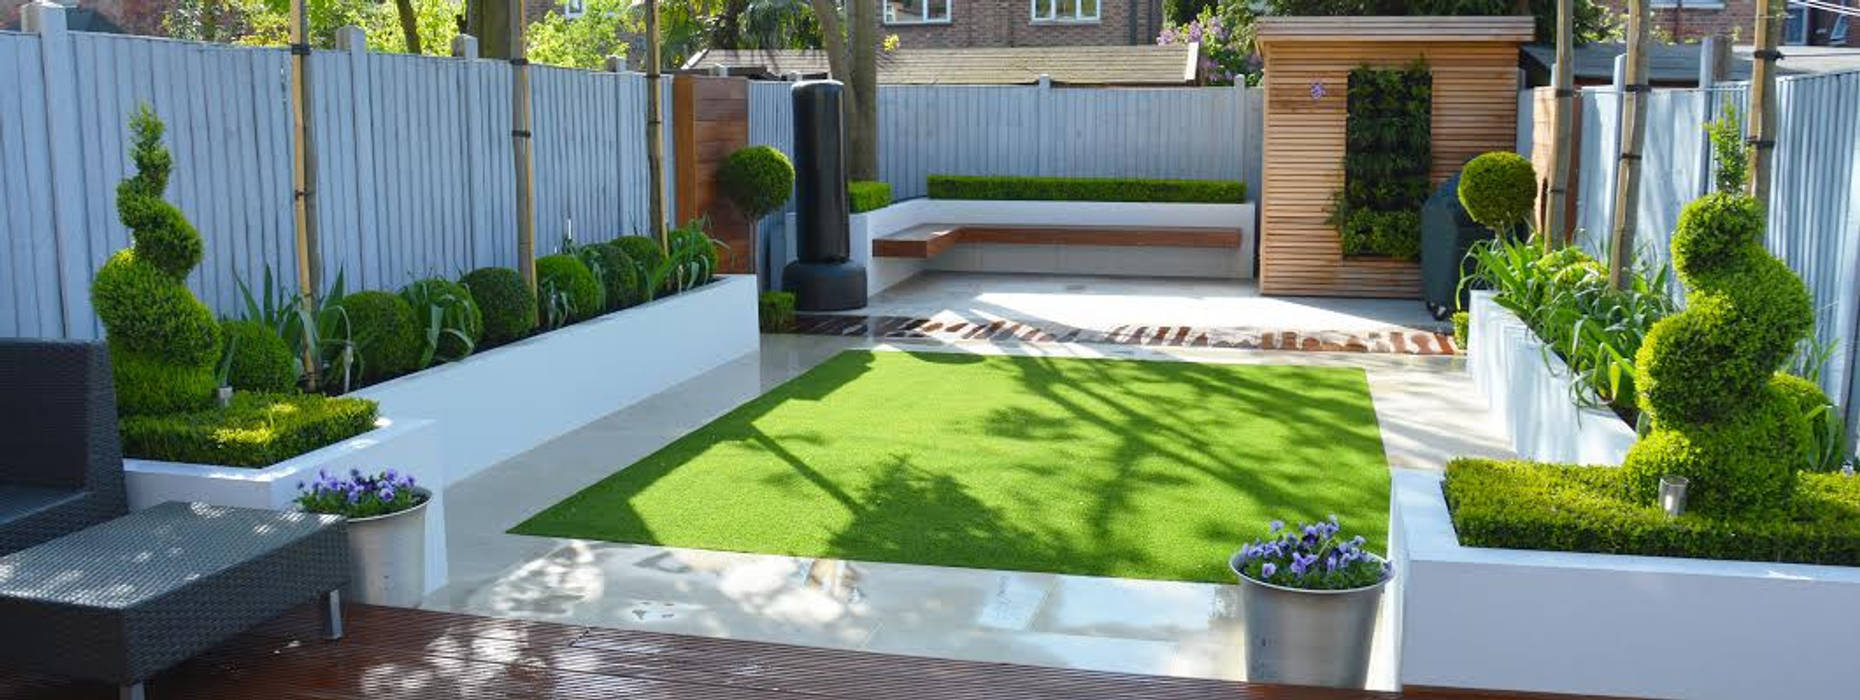 Minimalist Garden: Amazing relaxing space that you will fall in love with, Landscaper in London Landscaper in London Jardines modernos